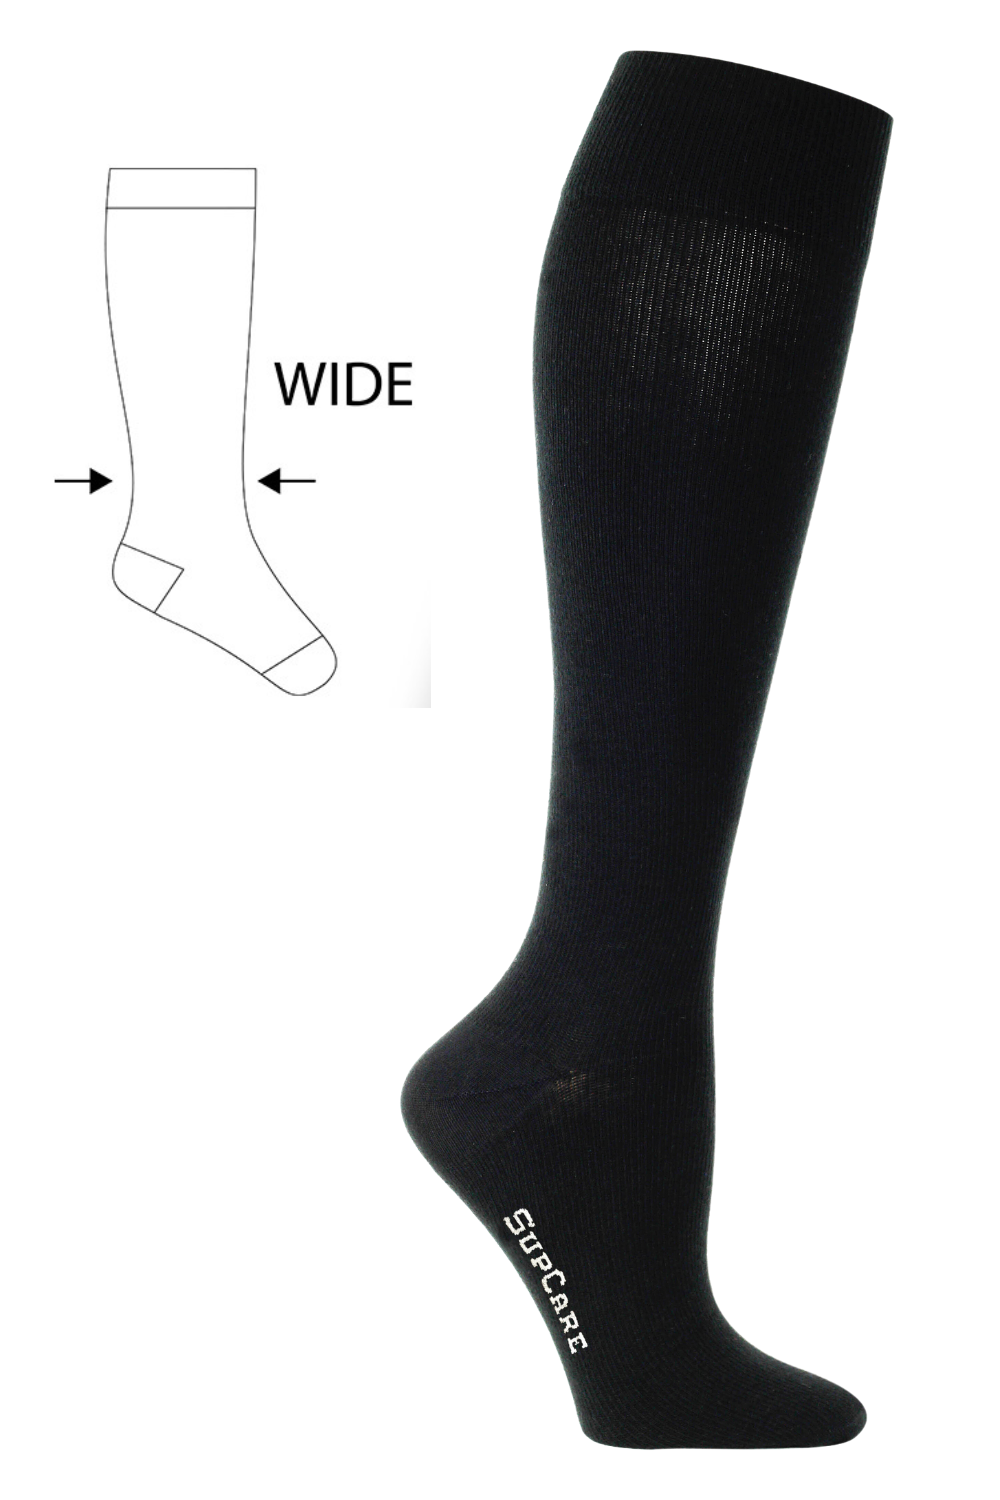 When to Put on Compression Socks for Flying